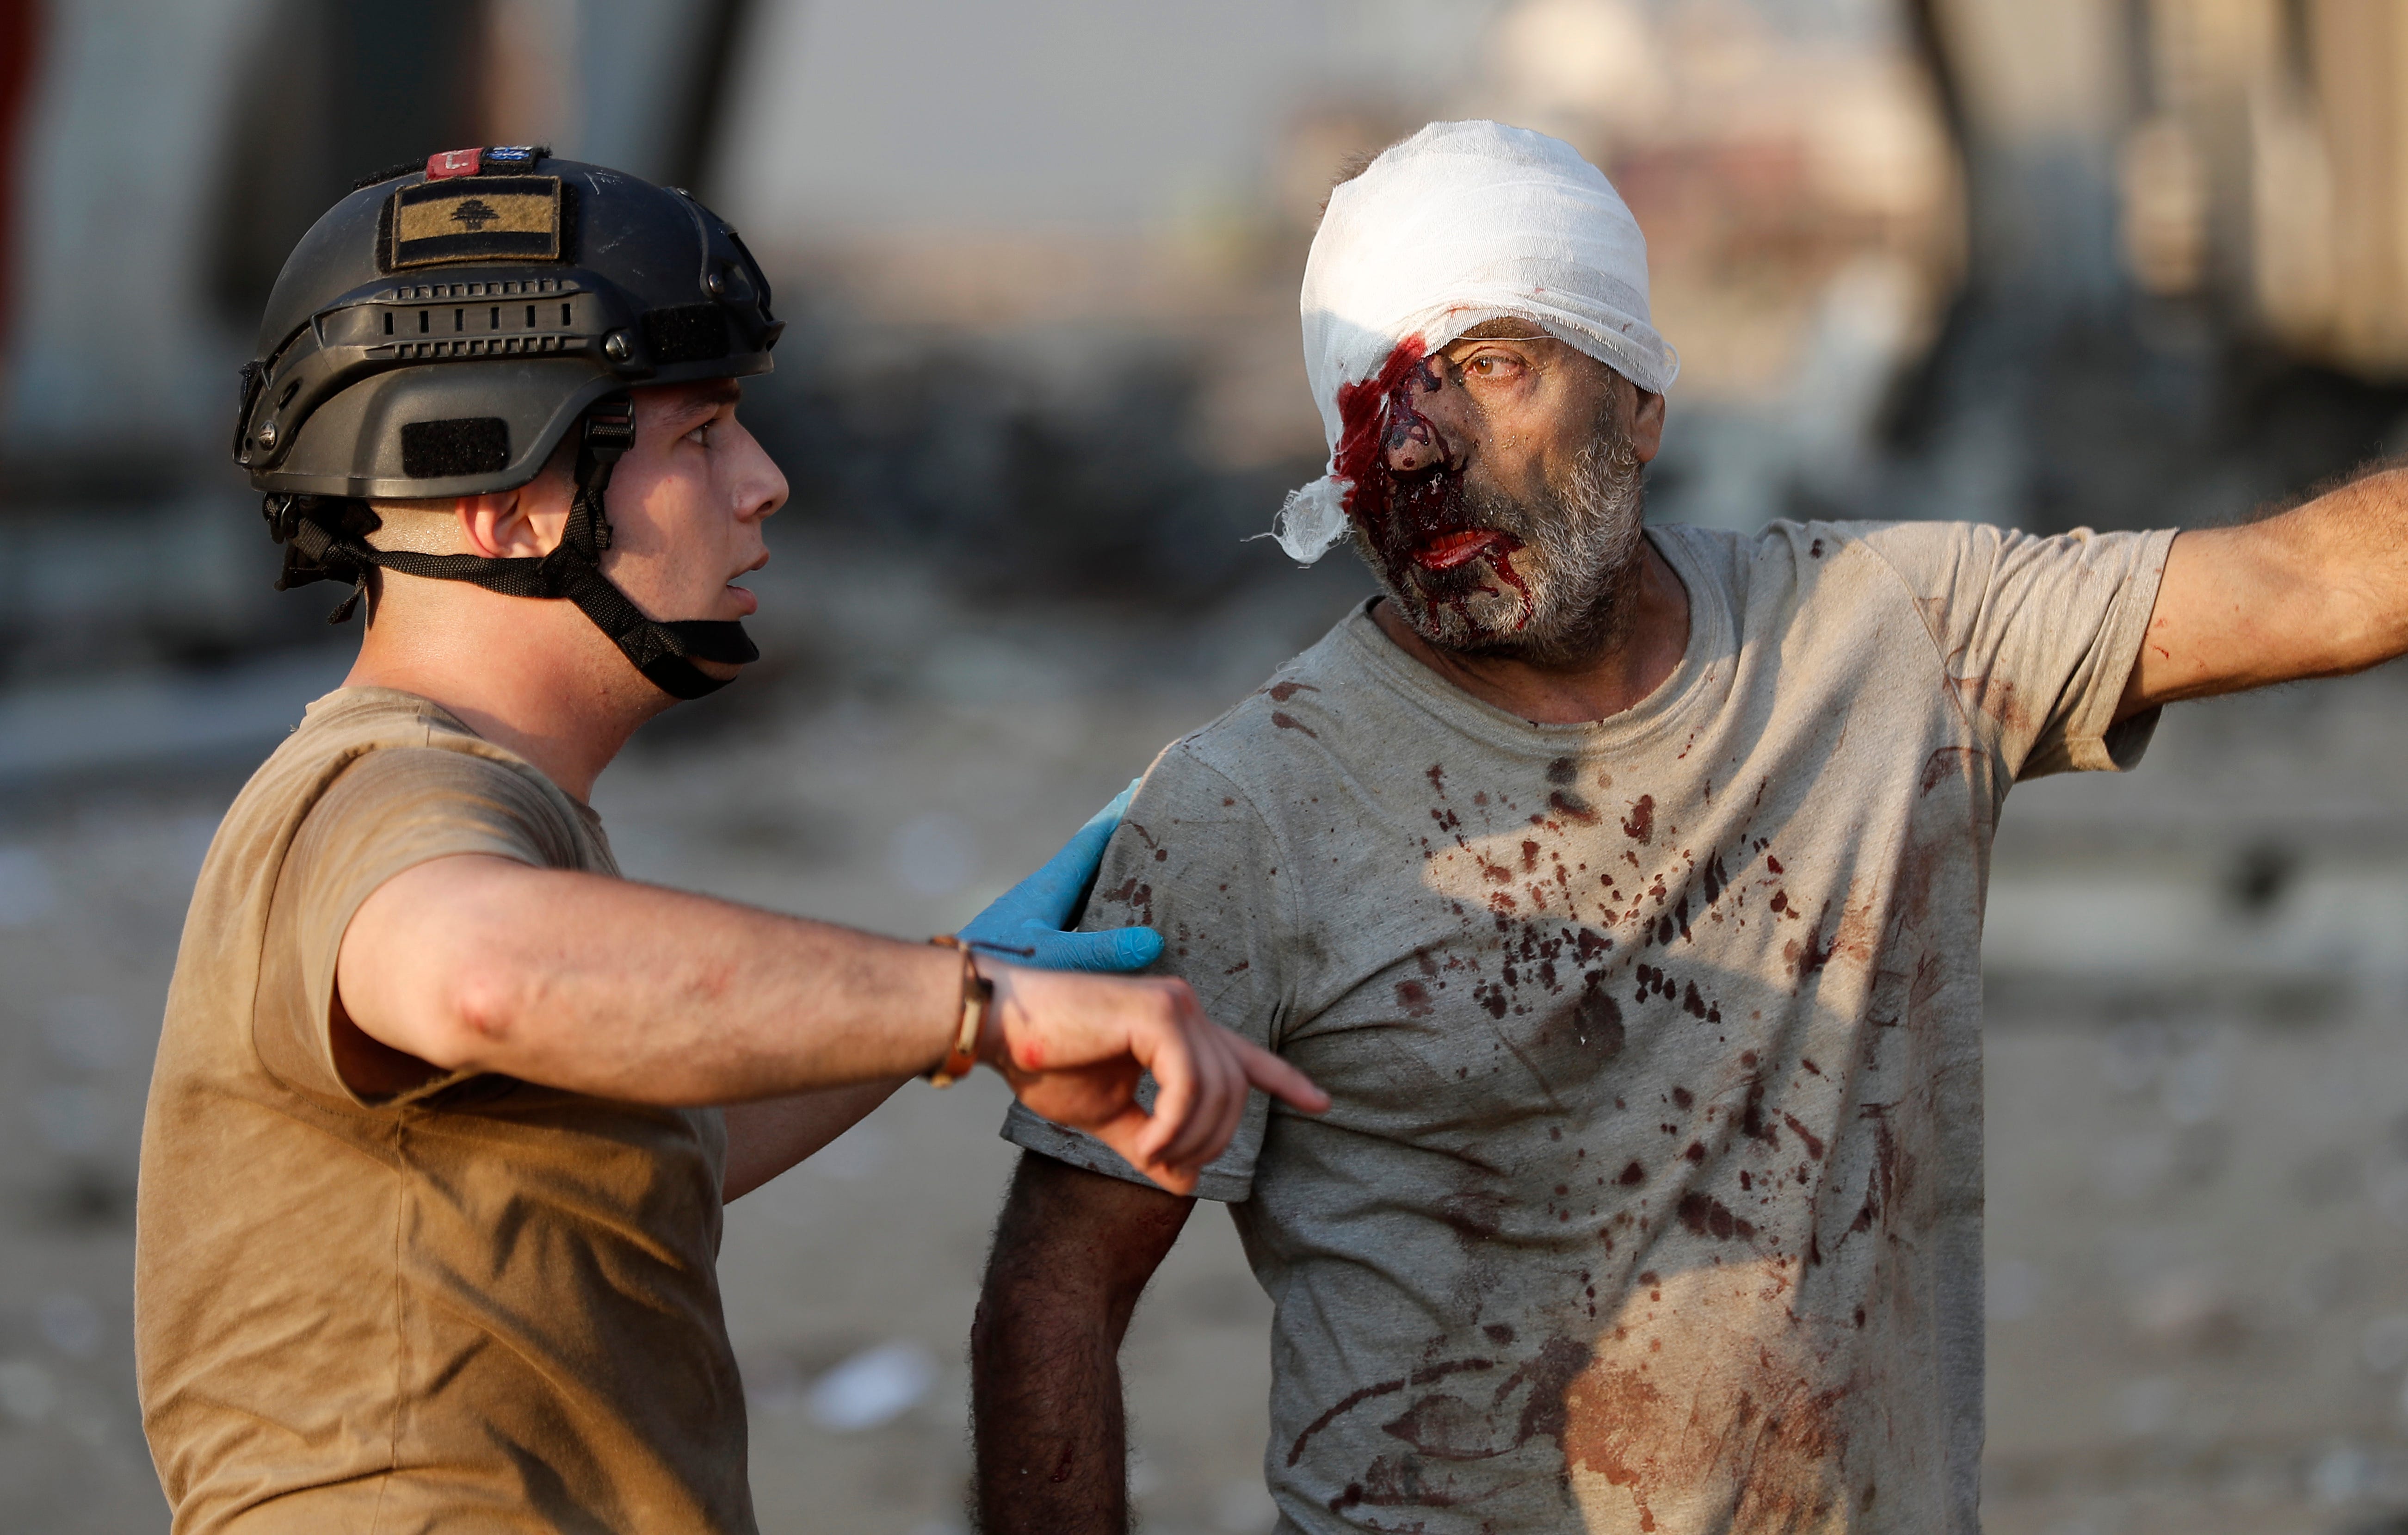 A Lebanese soldier directs an injured sailor to evacuate the explosion scene.